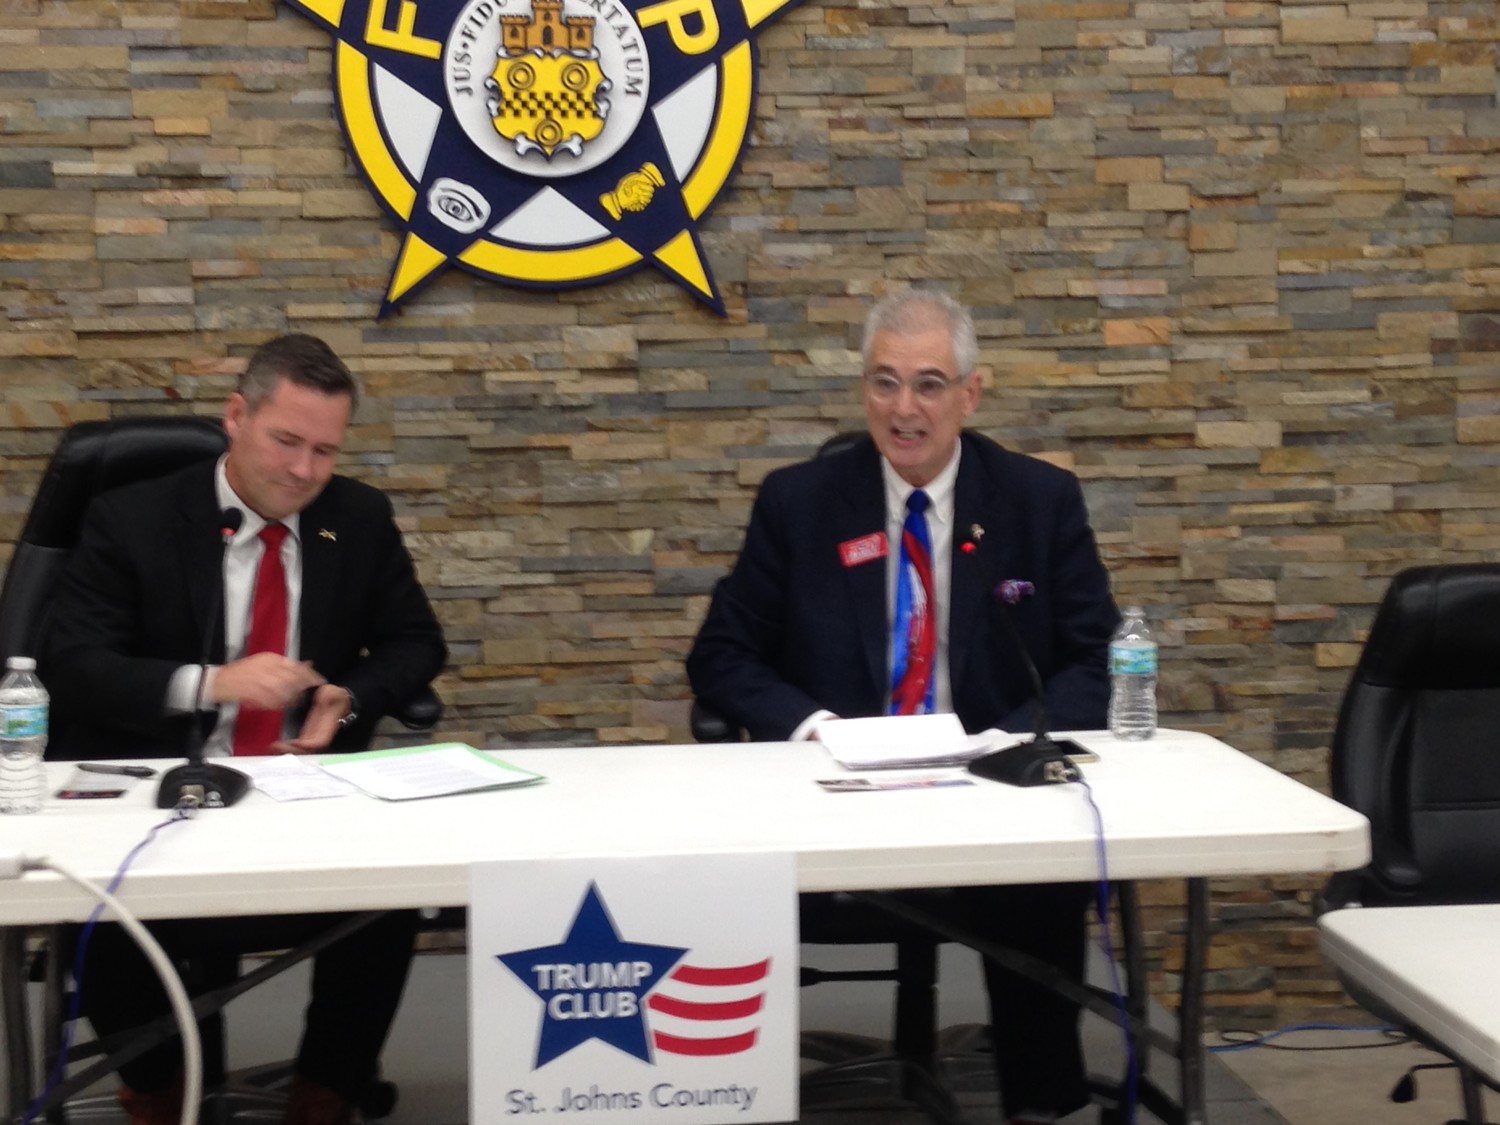 Congressional District 6 candidates Michael Waltz and Fred Costello tout their credentials at the June 4 Trump Club of St. Johns County meeting held at the St. Johns County FOP Hall.